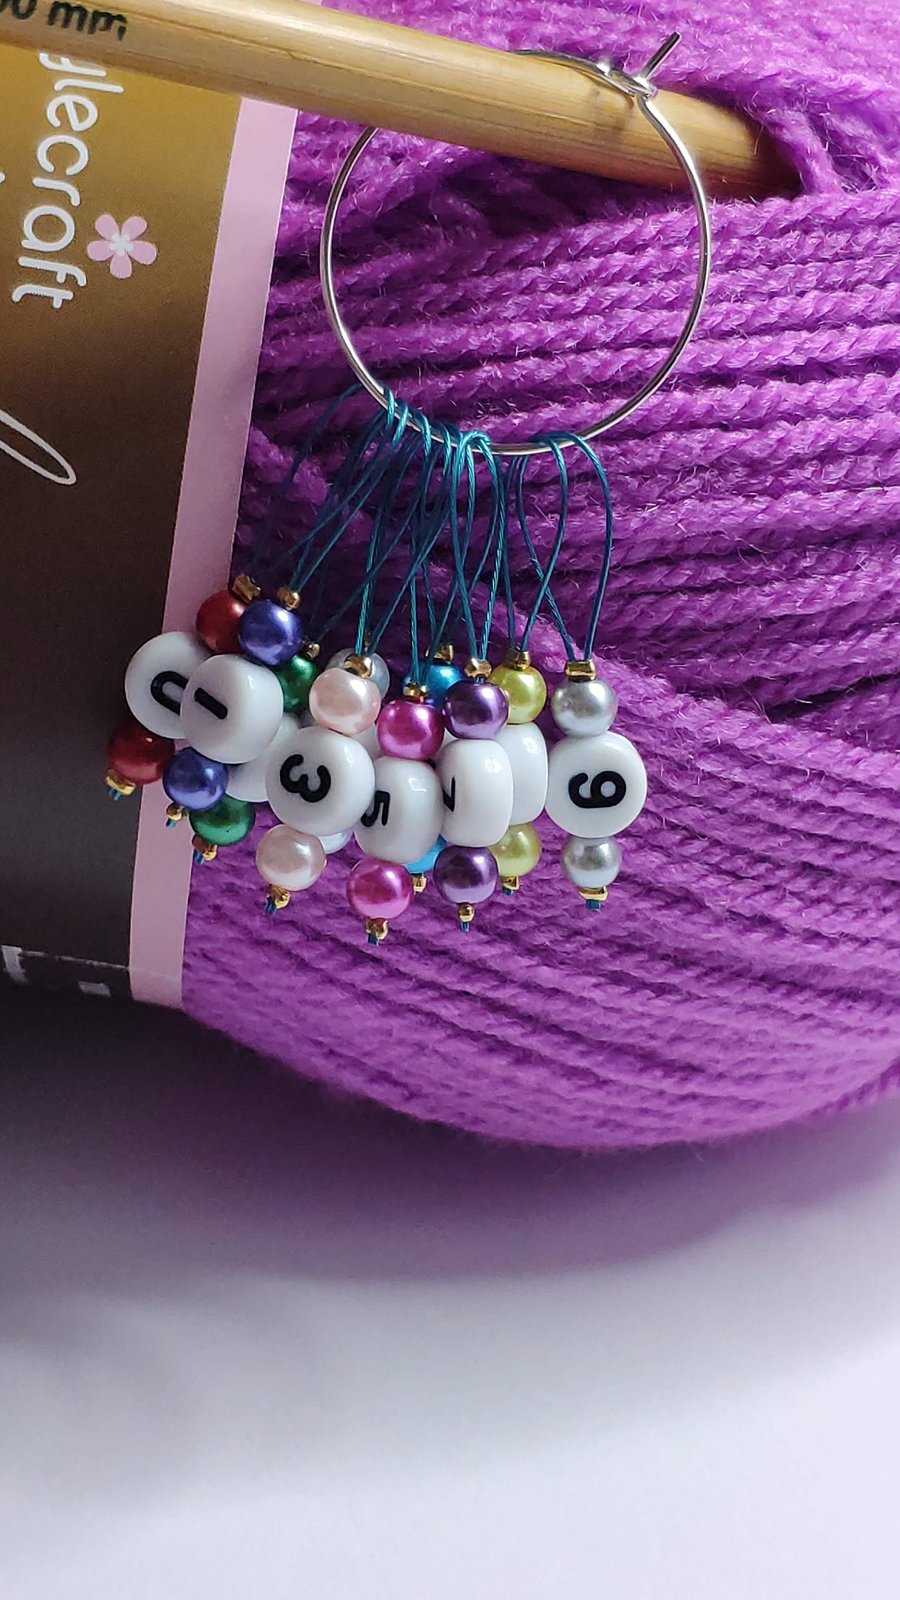 Set of number stitch markers for knitting